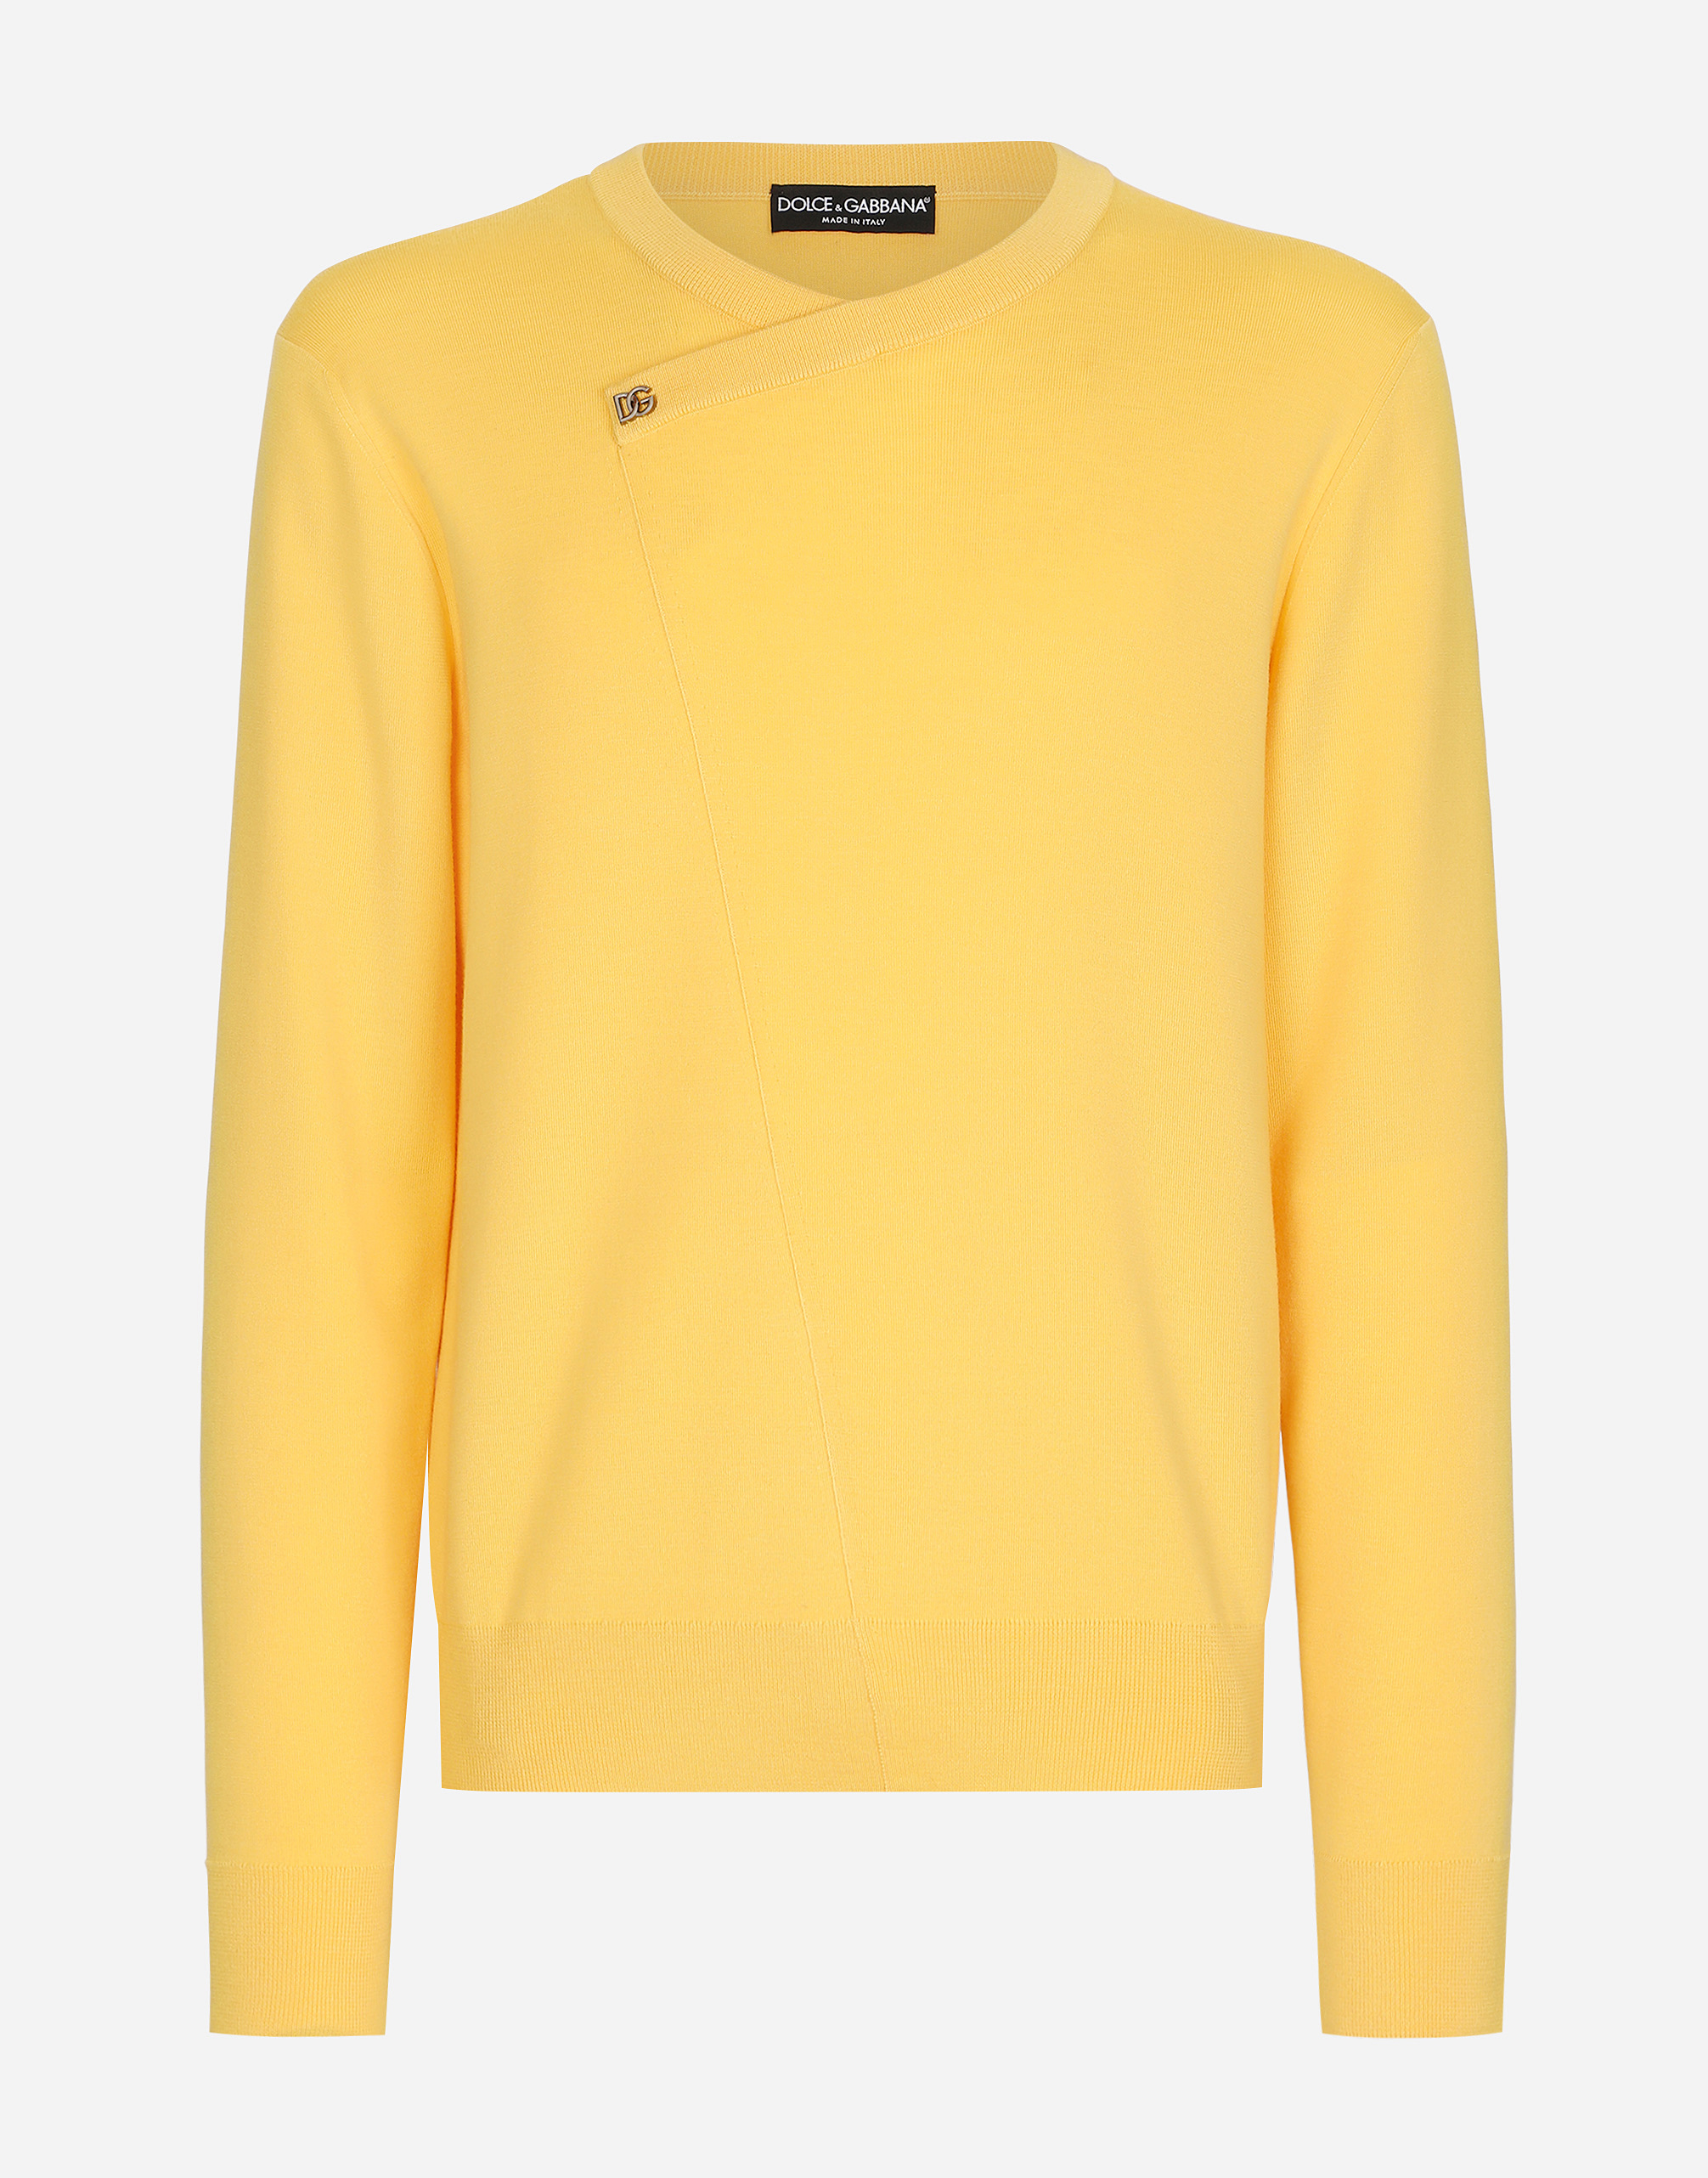 Wool round-neck sweater with DG hardware in Yellow